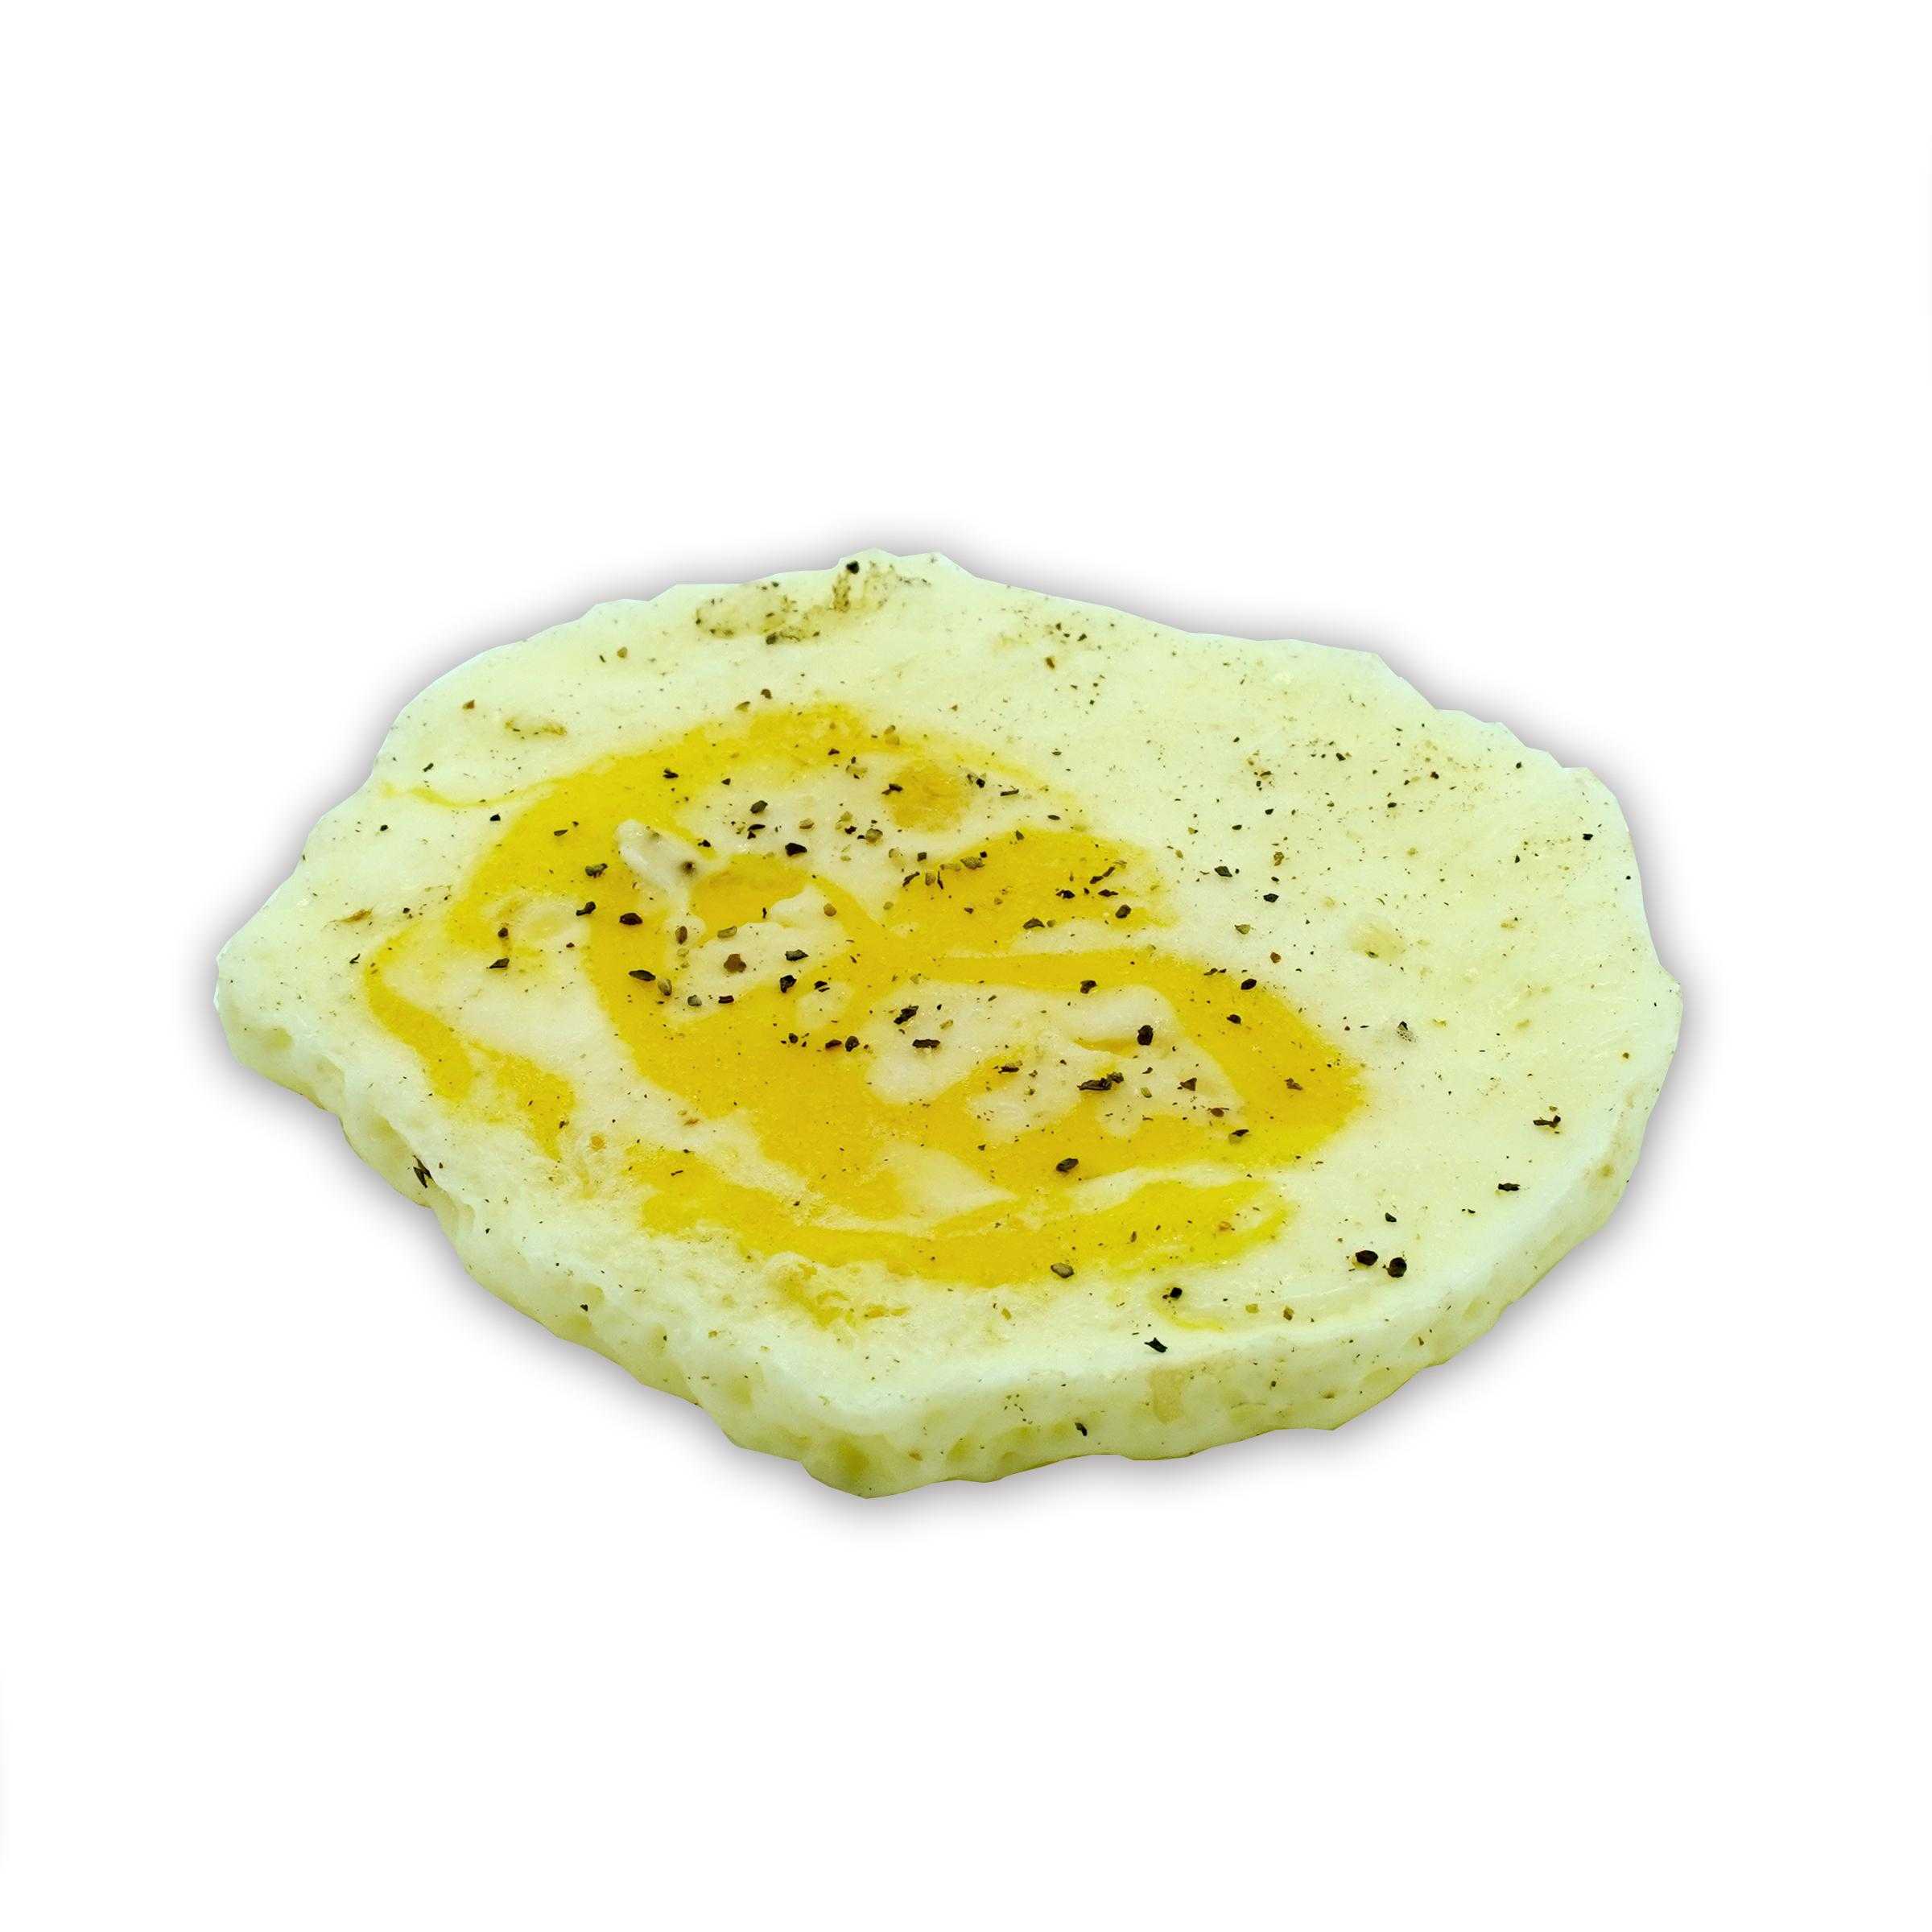 Papetti’s® Home-Style Fried Egg with Cracked Black Pepper, 128/2.25 oz